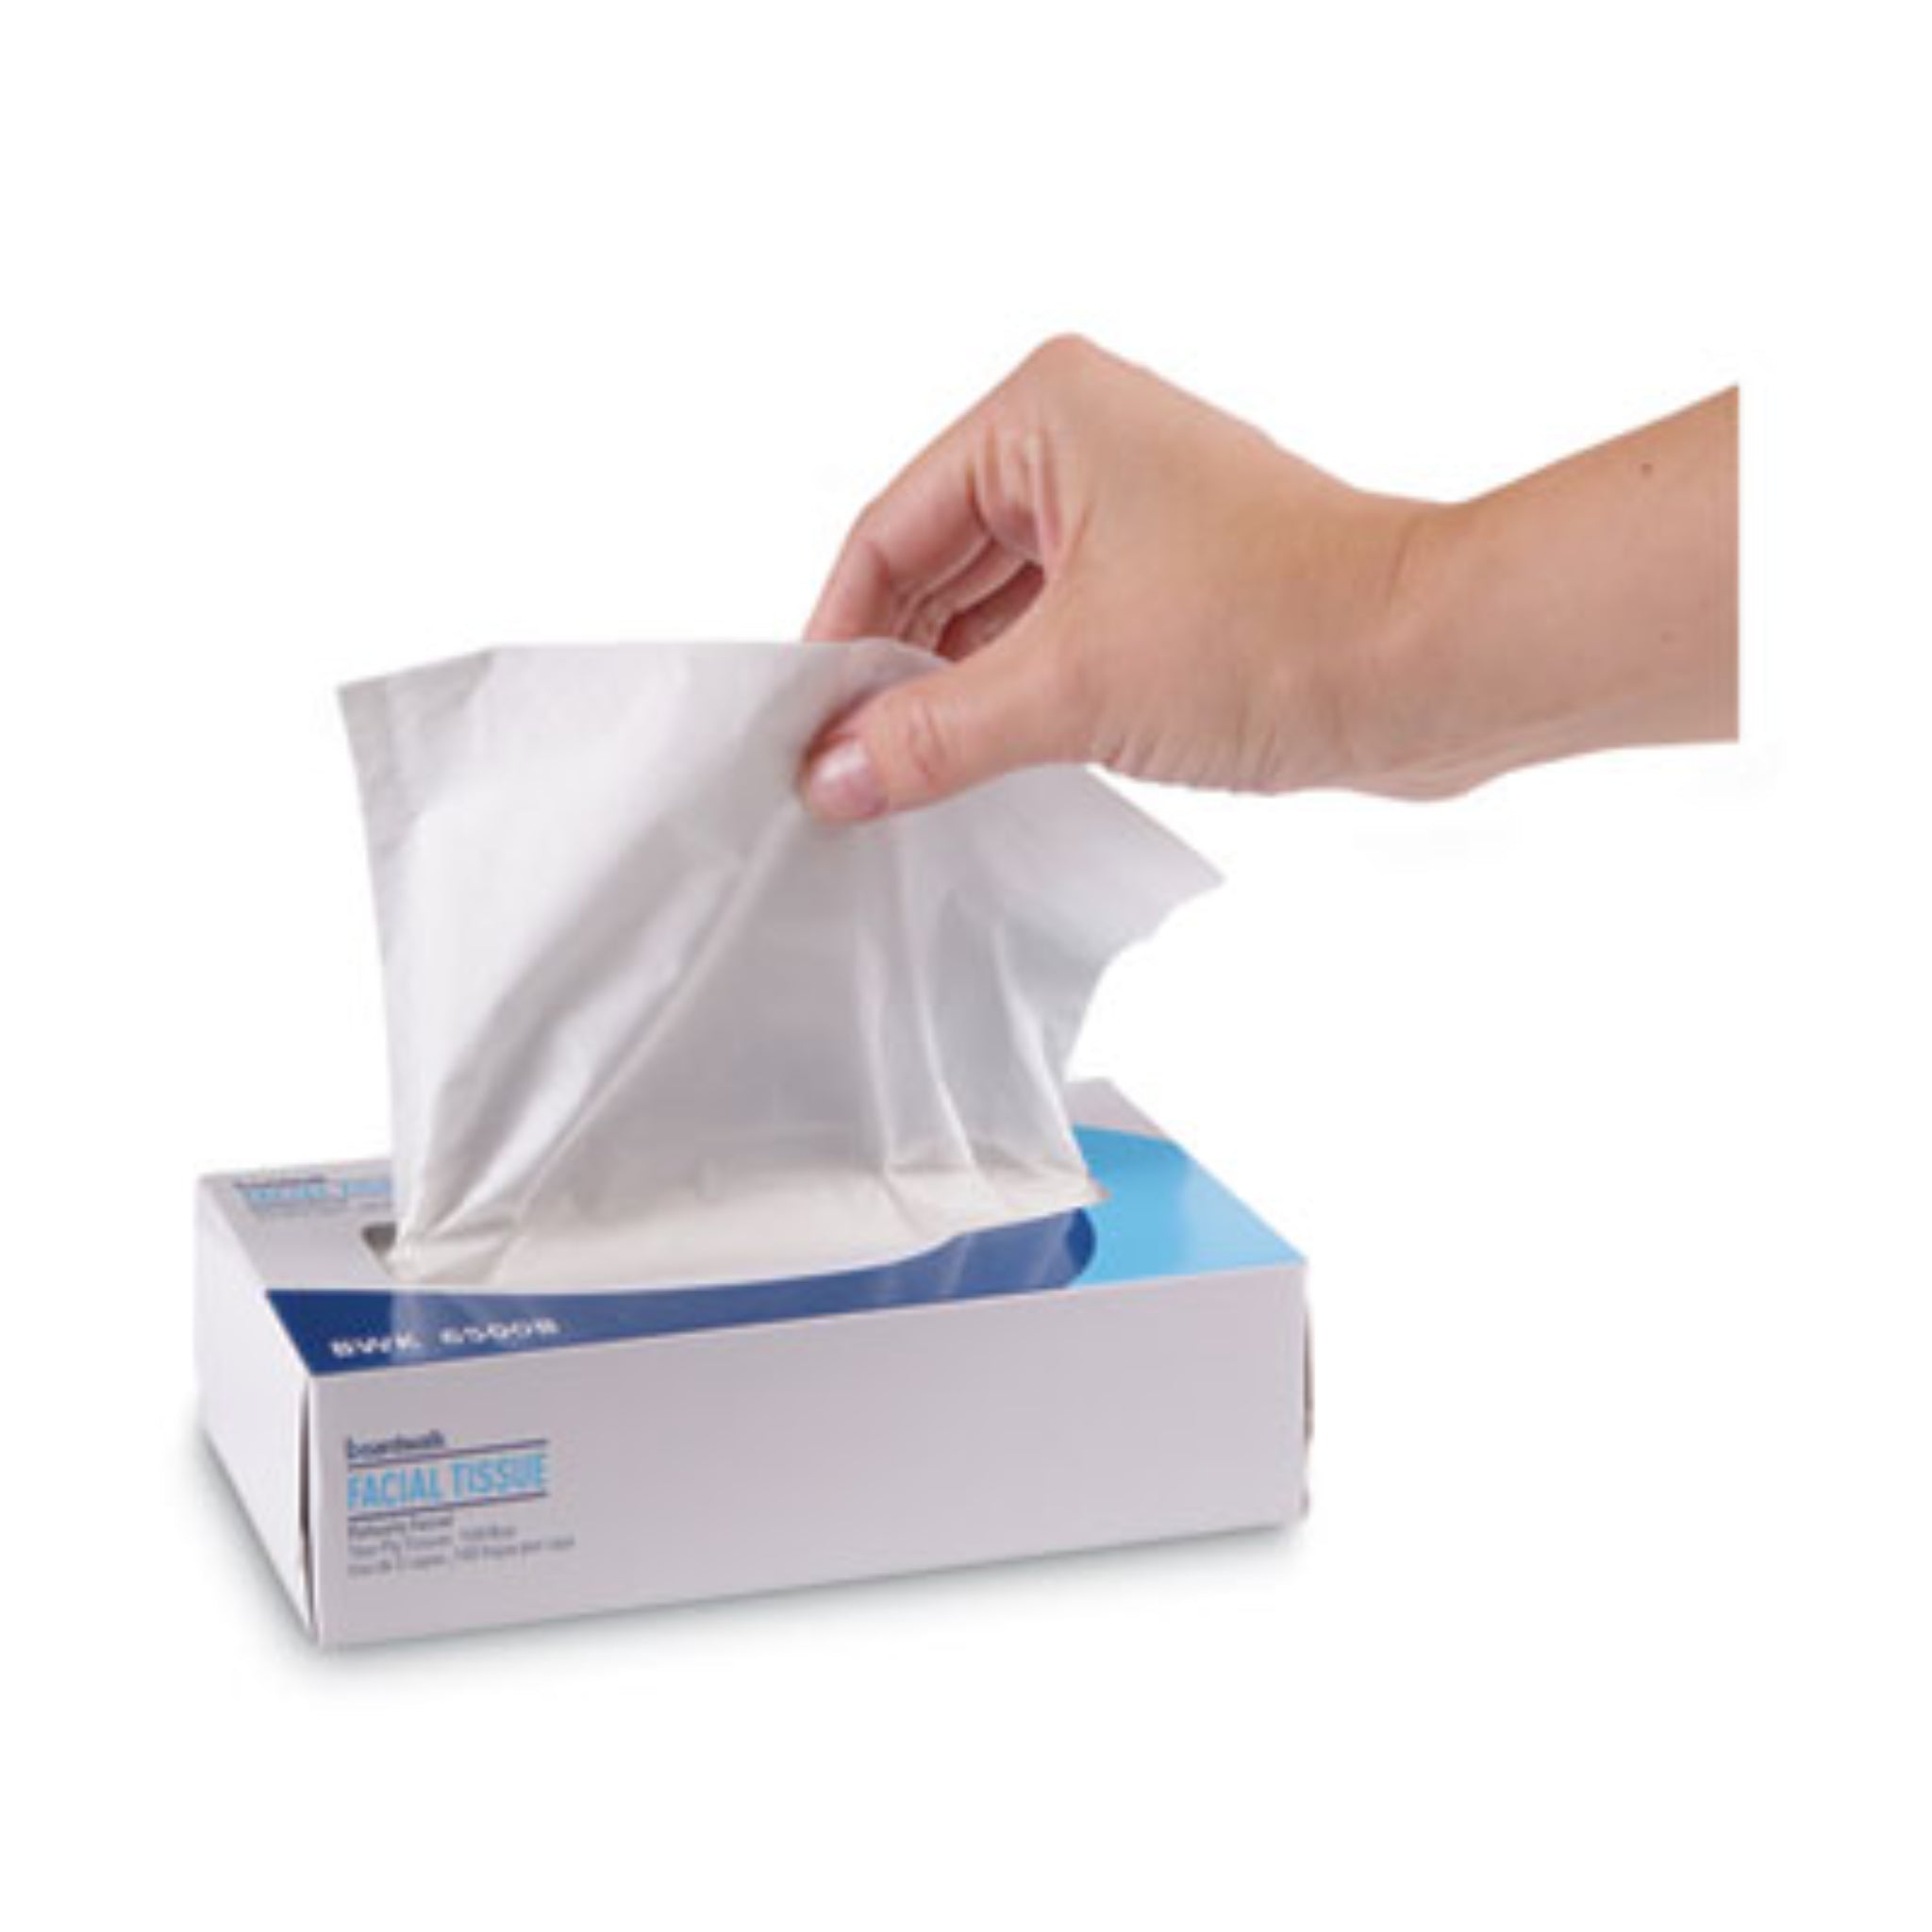 BOARDWALK BWK6500B Office Packs Facial Tissue, Perforated